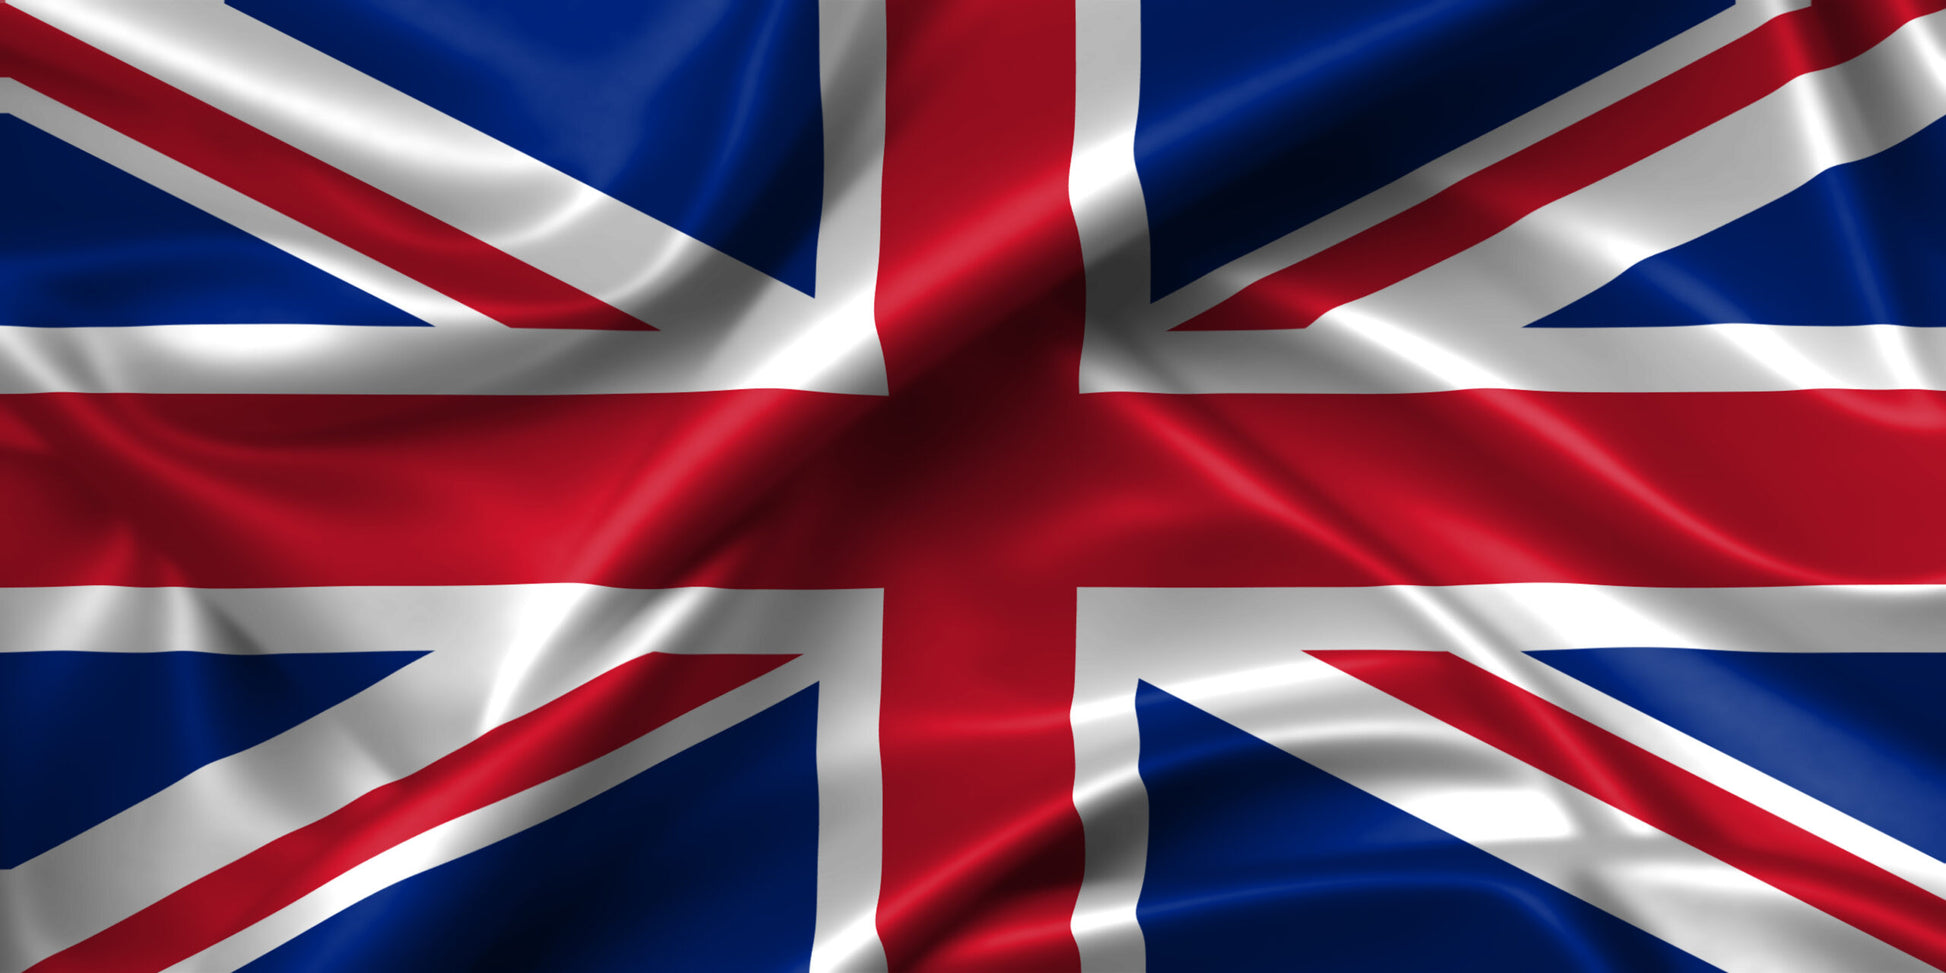 Union jack flag 5ft x 3ft premium quality with eyelets – Flagseller